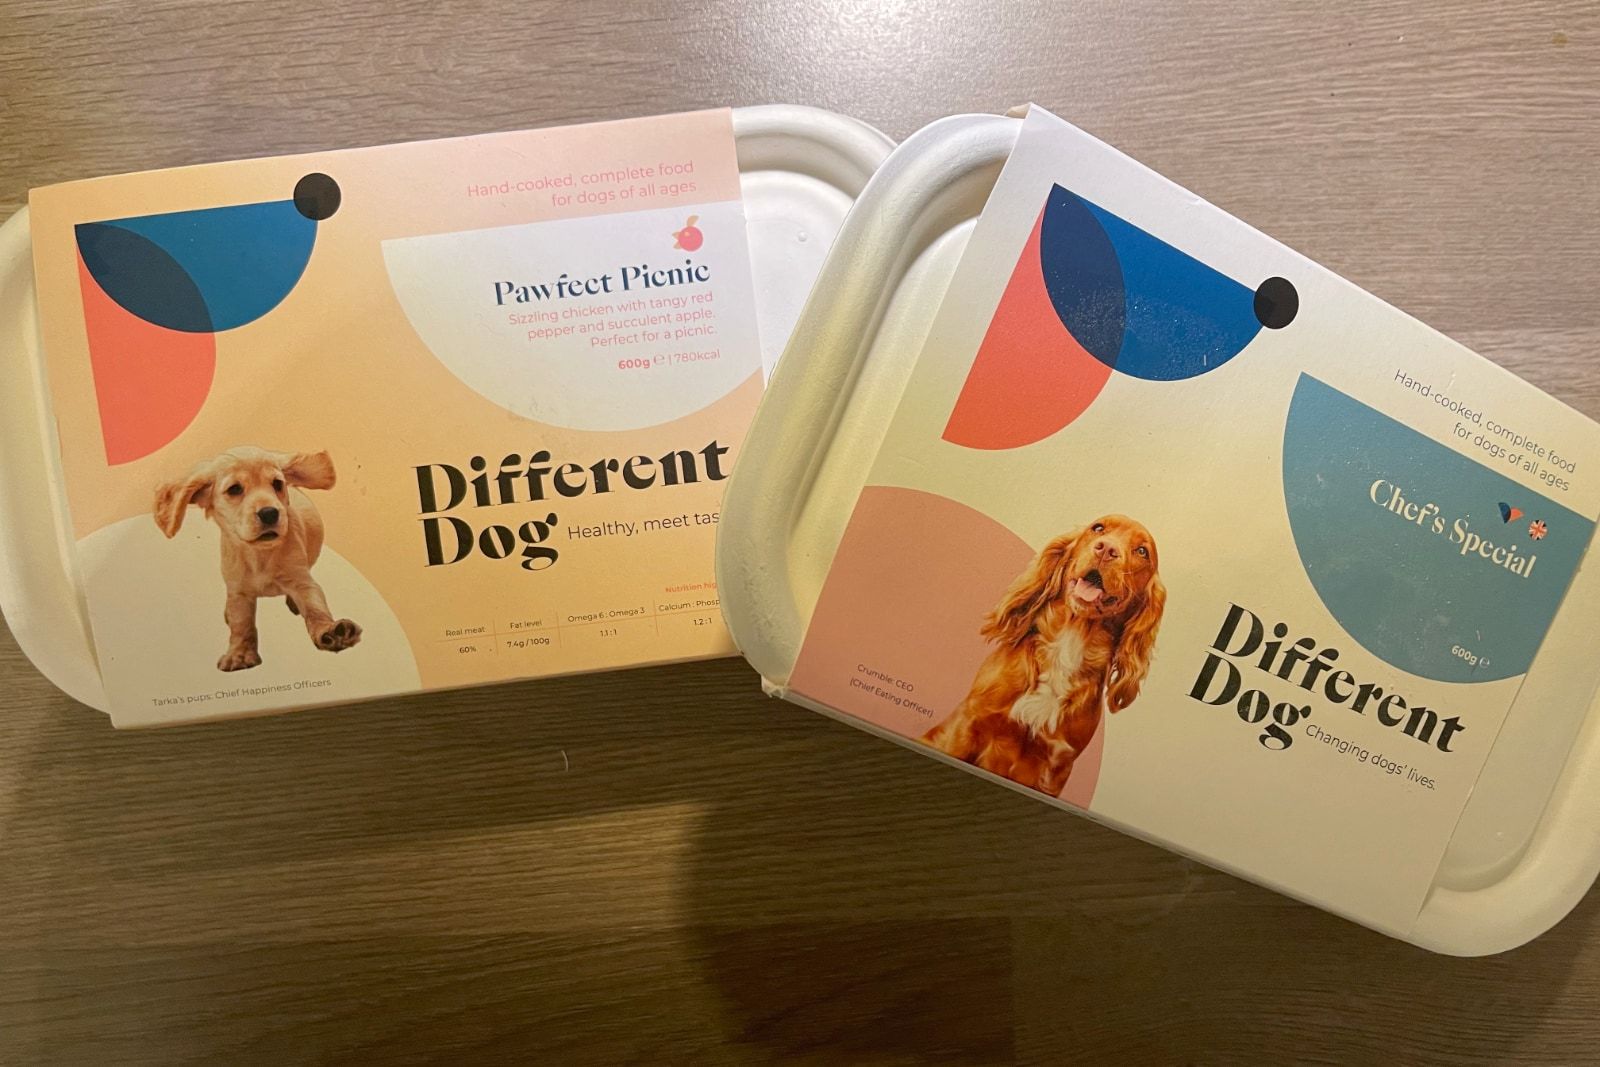 Different Dog meal packets